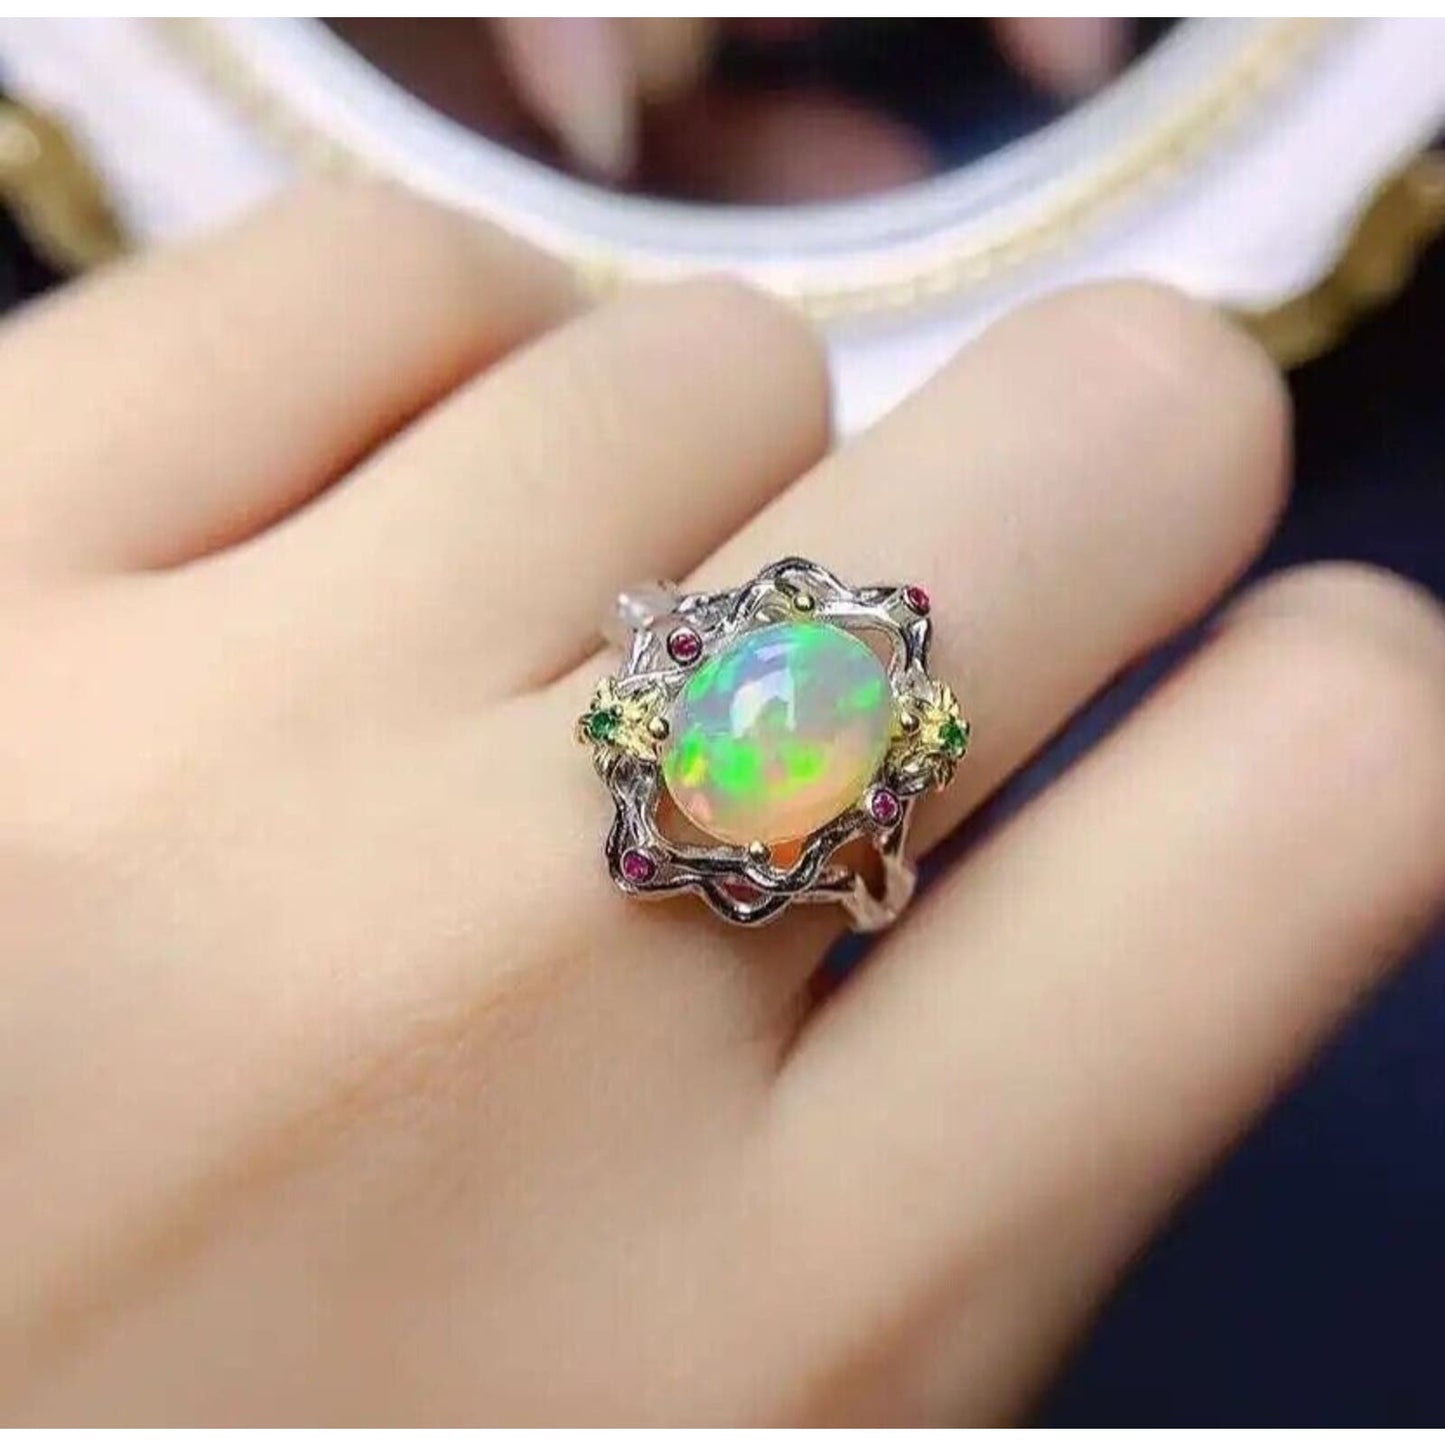 White Fire Opal Gemstone Ring 8x10mm Sterling Silver